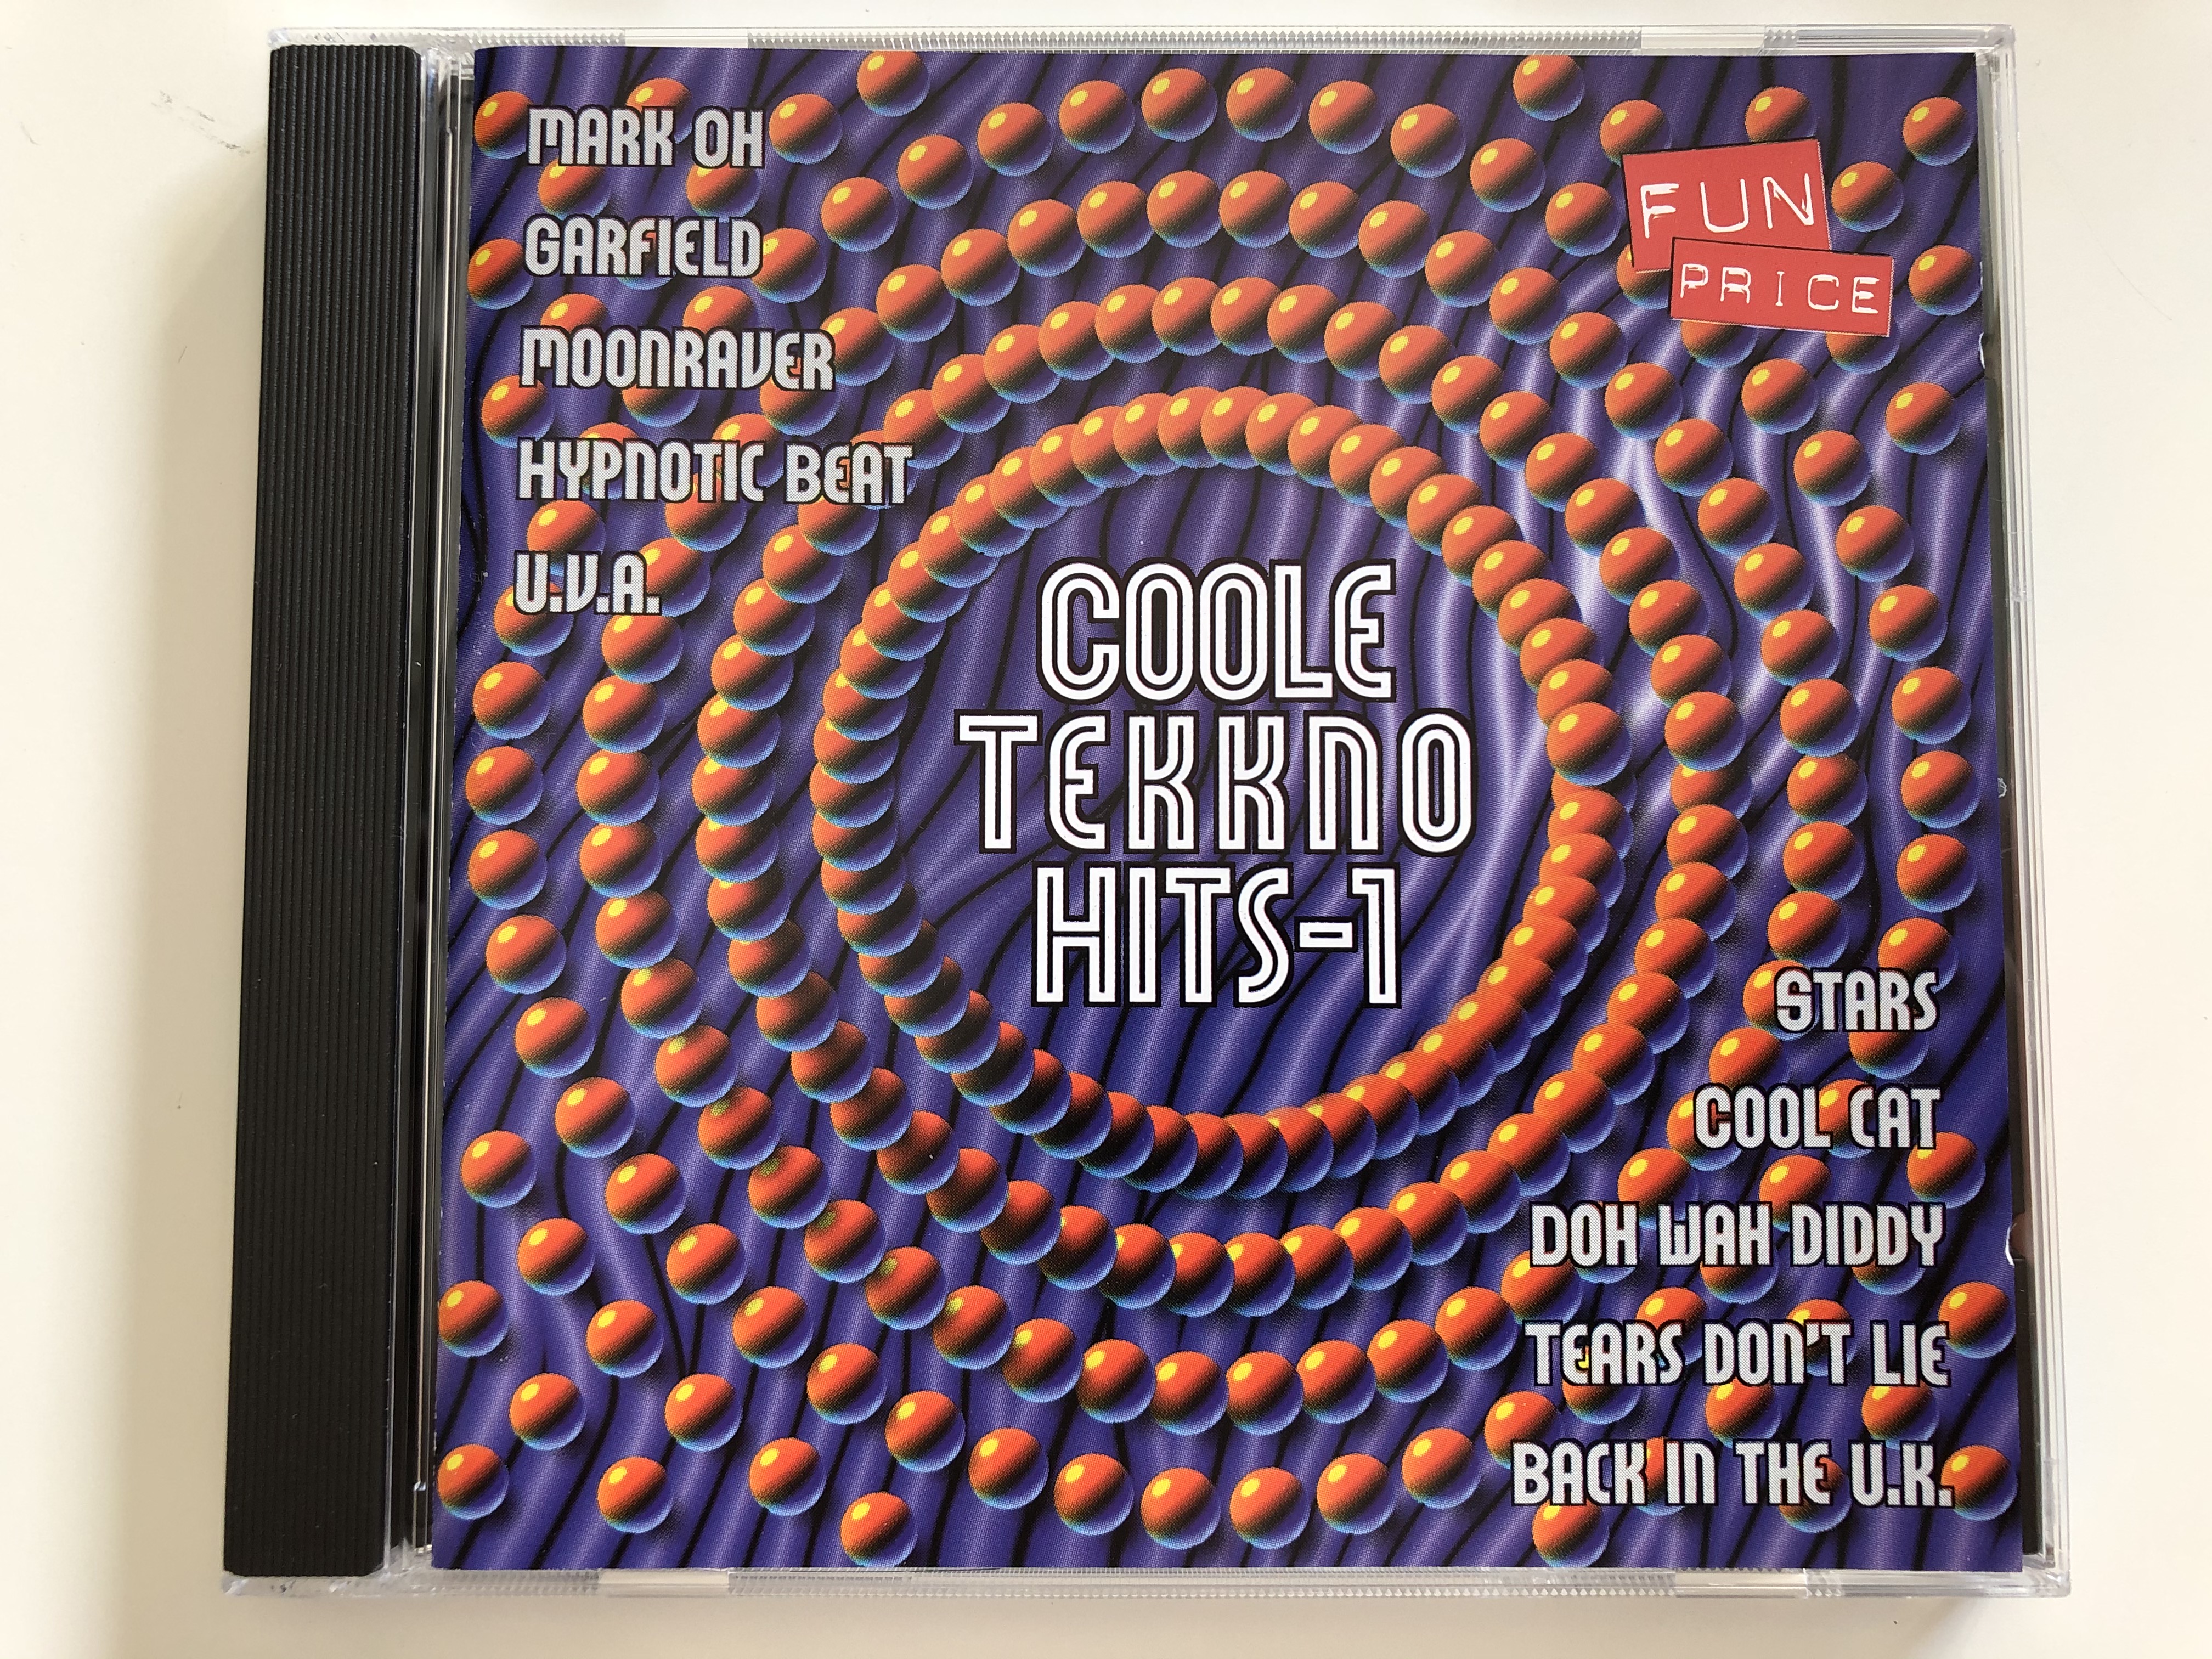 coole-tekkno-hits-1-mark-on-garfield-moonraver-hypnotic-beat-v.v.a-stars-cool-cat-doh-wah-diddy-tears-don-t-lie-back-in-the-u.k.-happy-music-audio-cd-1996-193019-2-1-.jpg